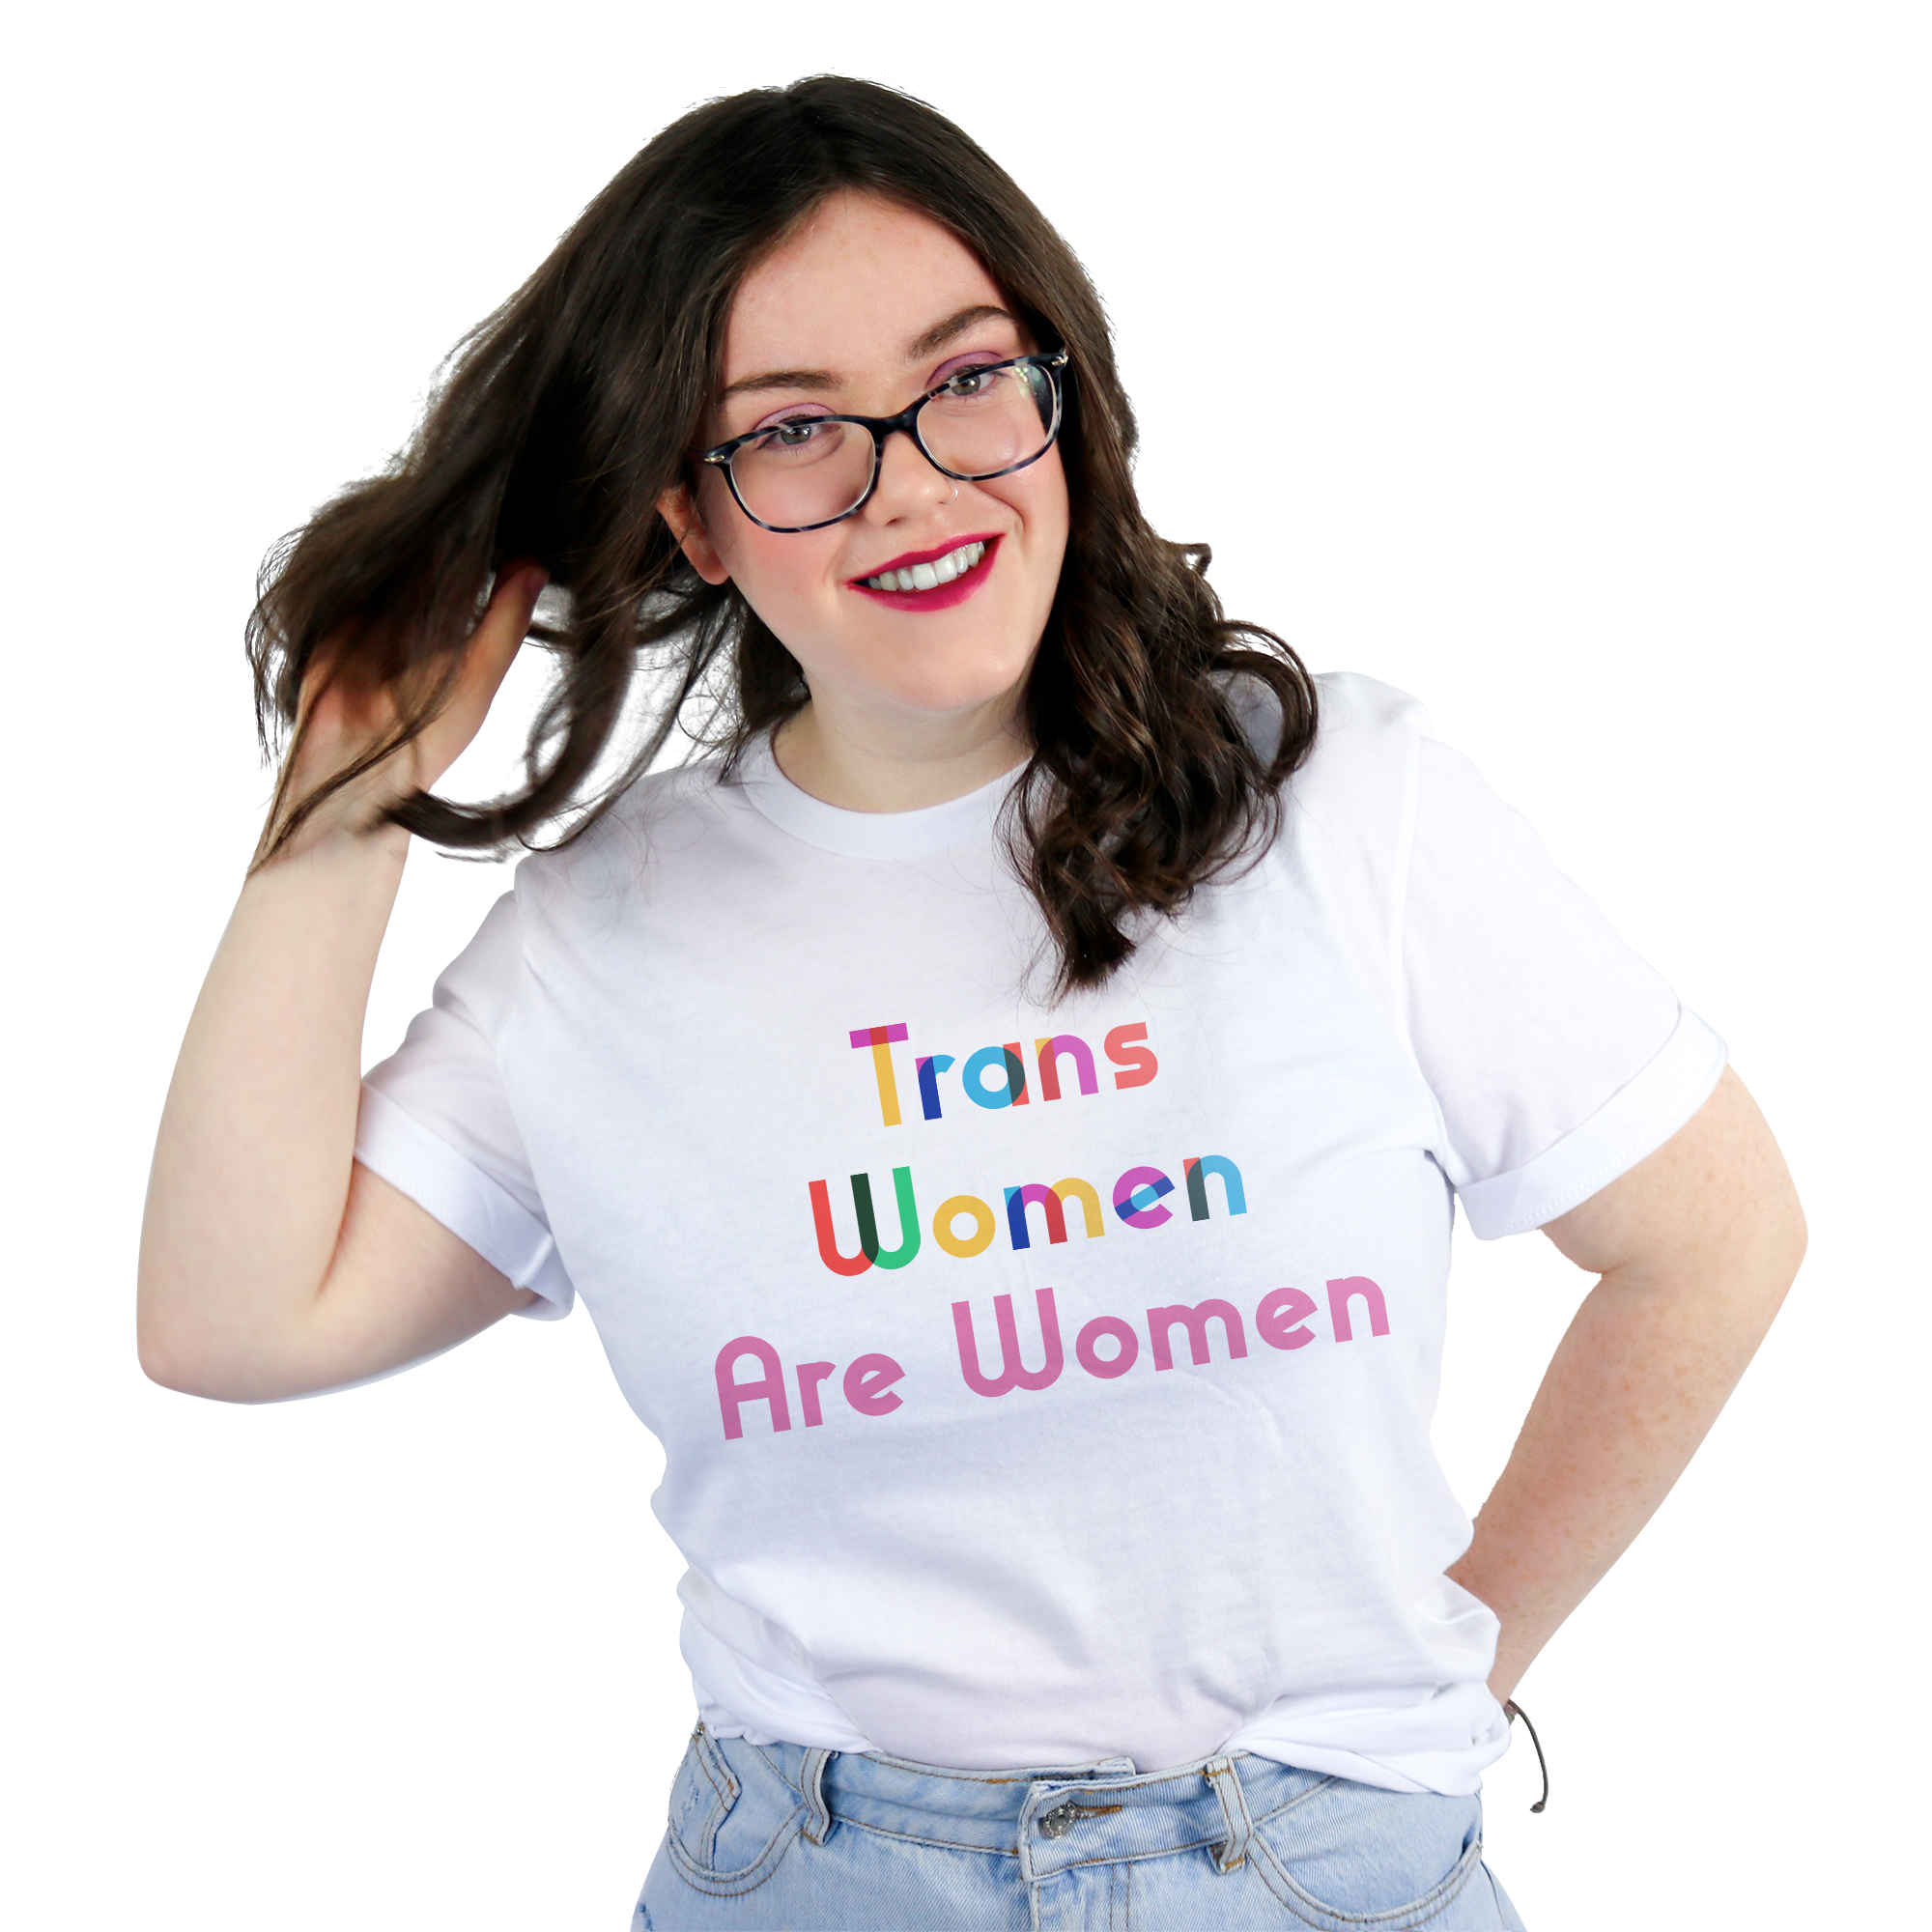 Trans women are women t-shirt PinkNews Pride for All